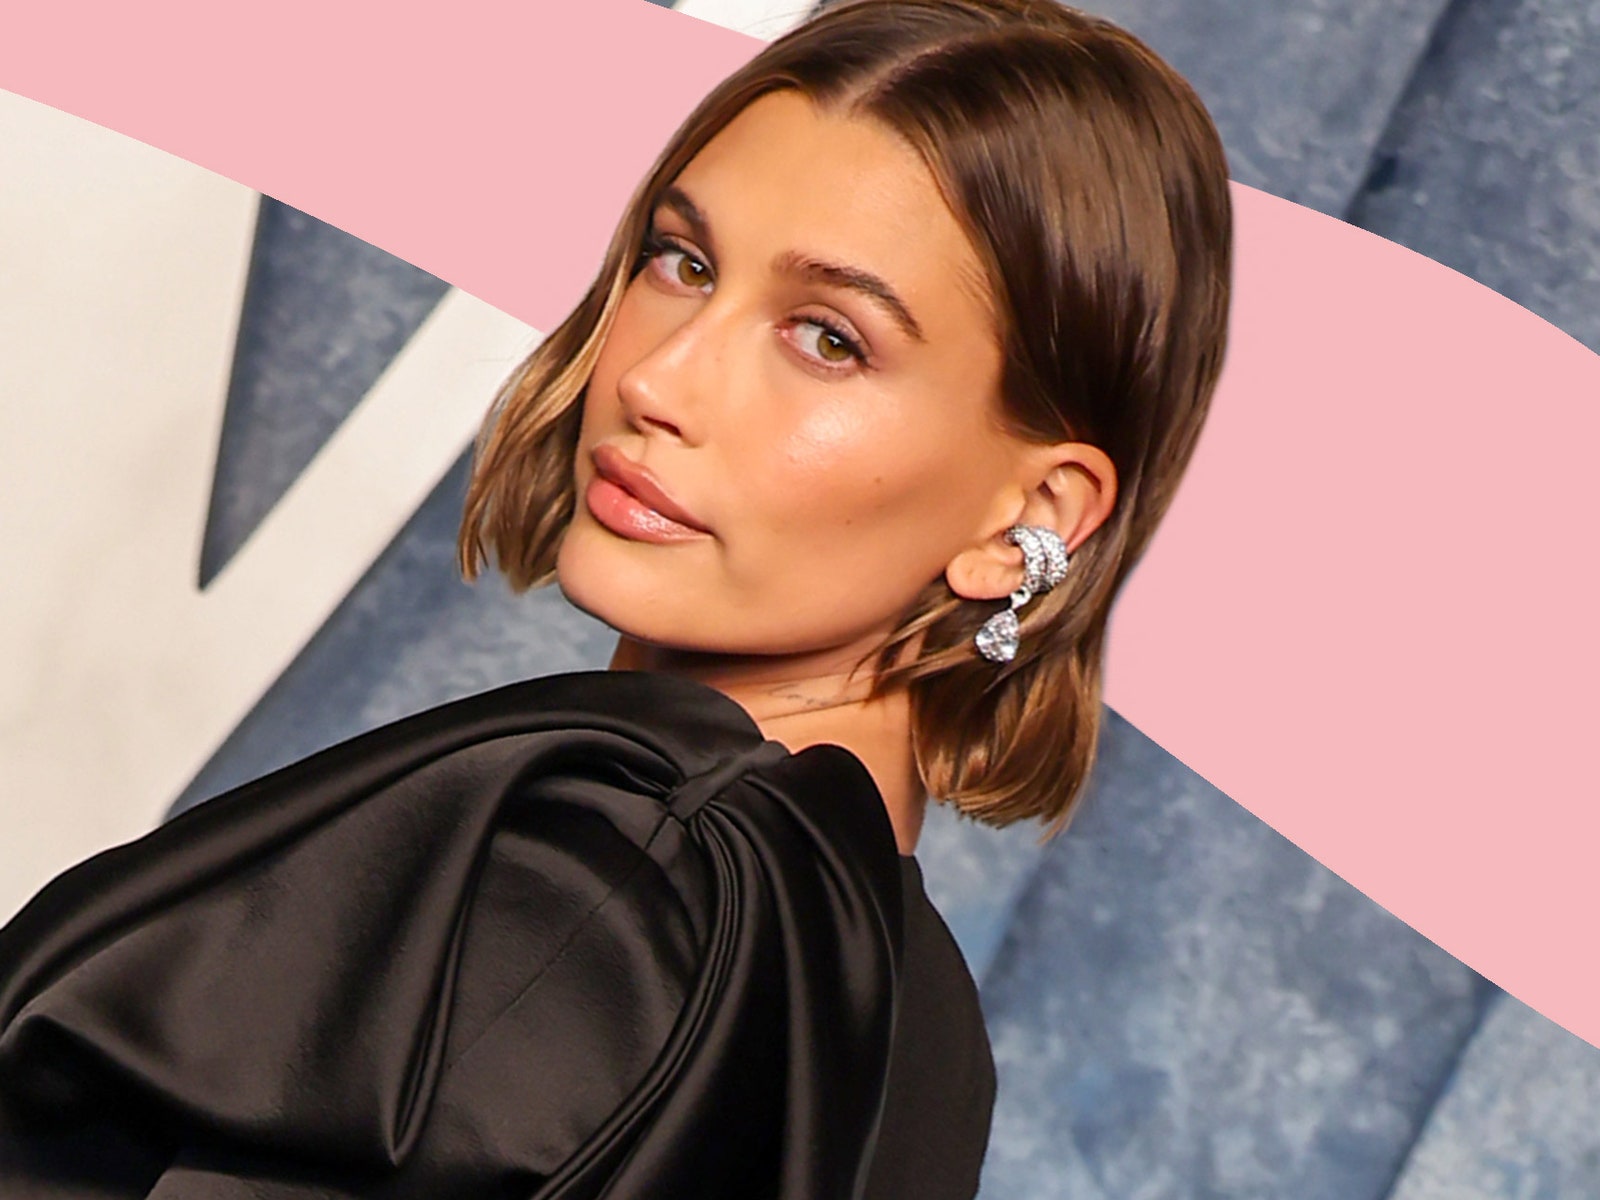 Hailey Bieber refuses to have an awkward stage while growing out her bob